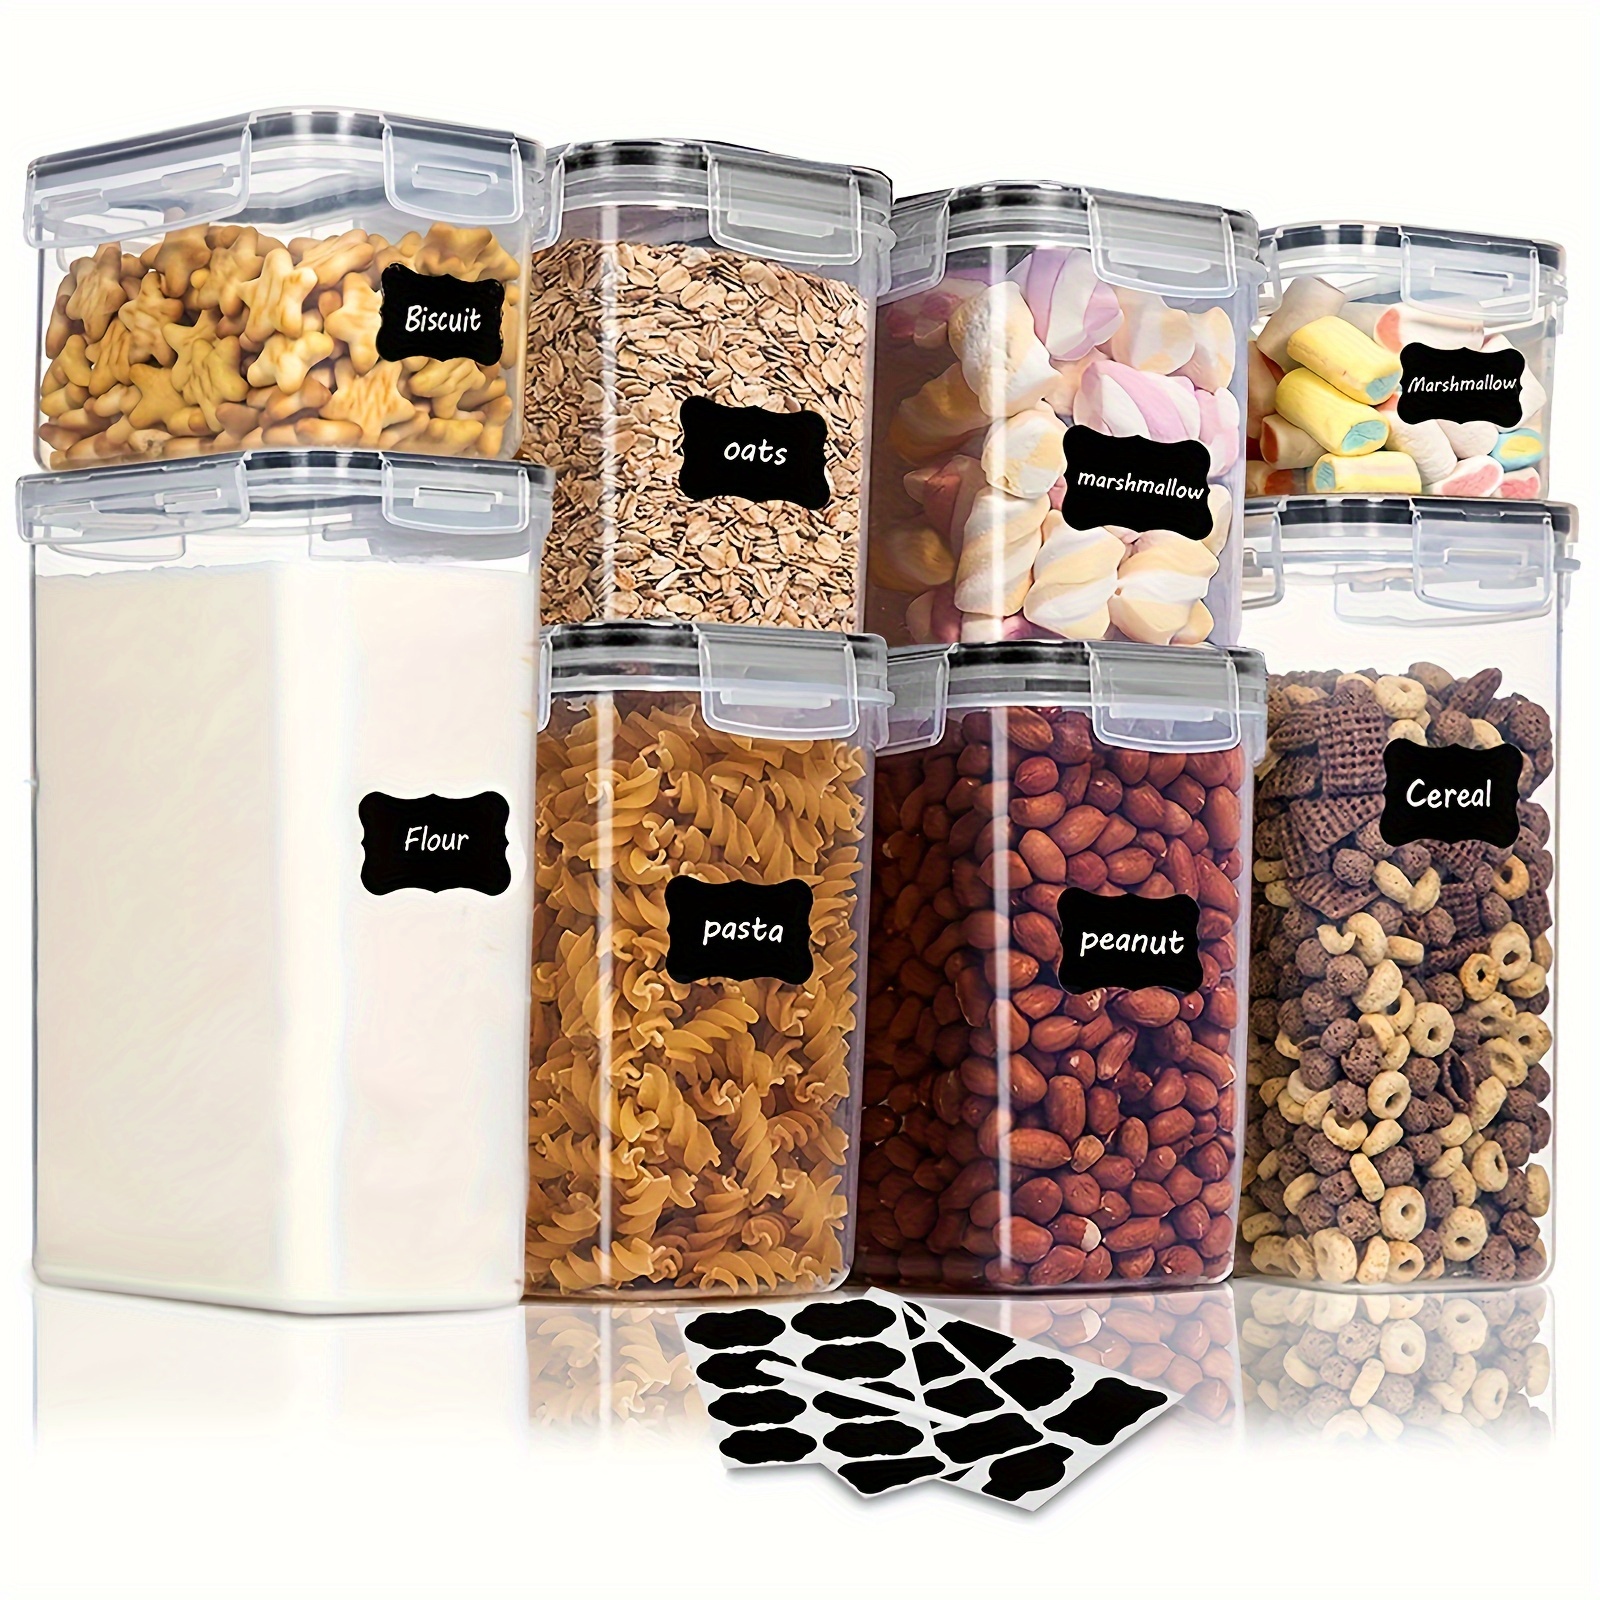 Moocorvic Airtight Food Storage Containers with Lids for Kitchen Cereal Containers  Storage,Kitchen Must Haves for Flour,Sugar Dry Food Storage,BPA Free  Plastic Canisters with Accessories, 